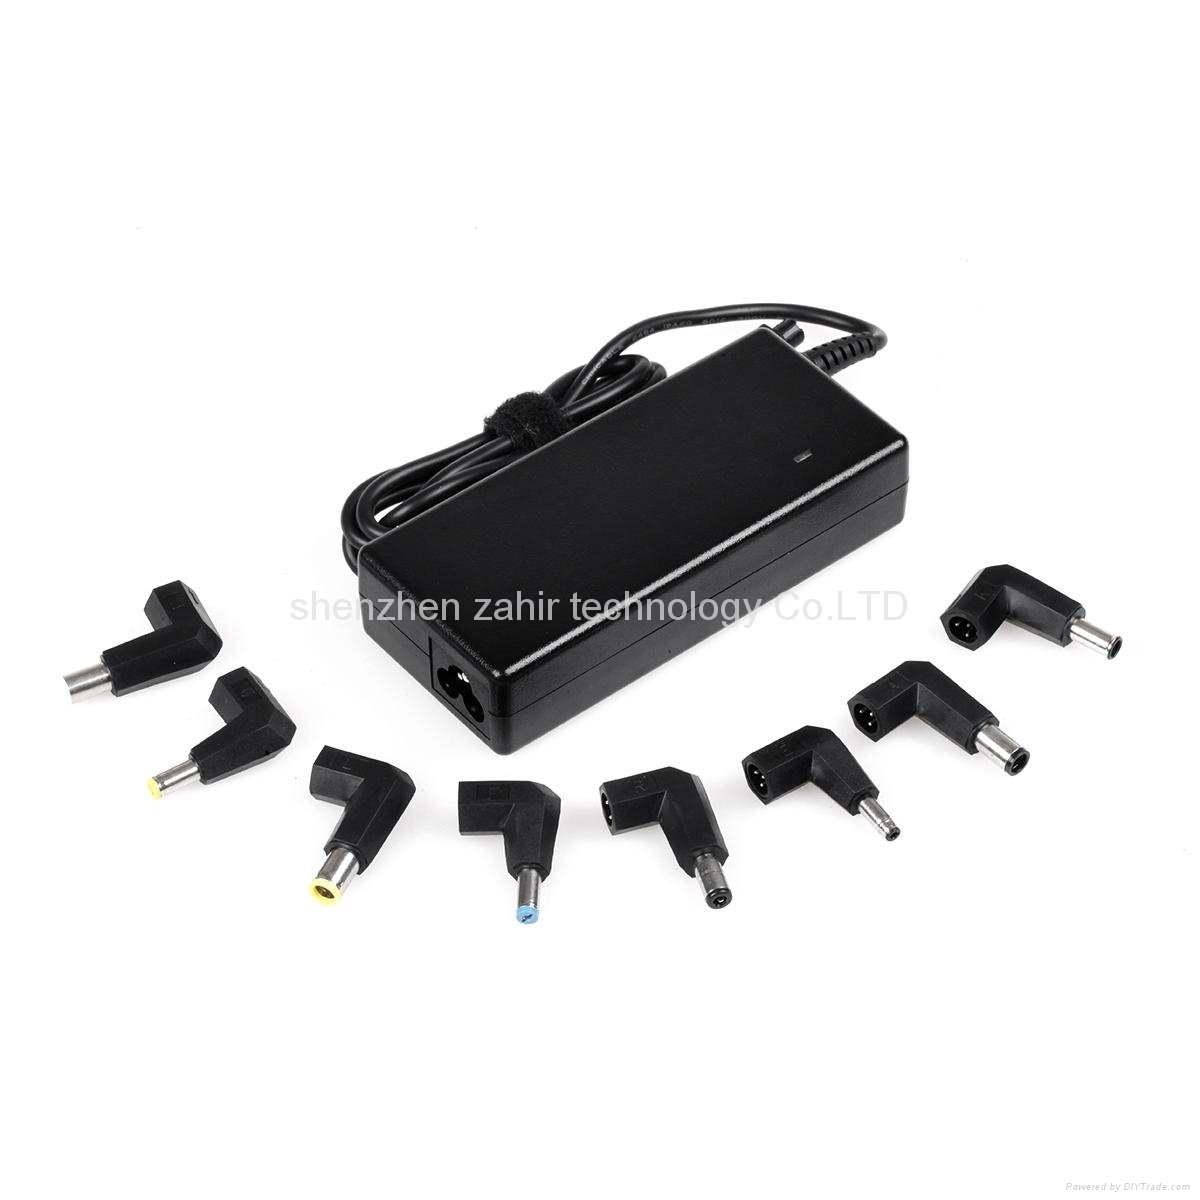 90W Universal Notebook Laptop AC Charger Power Adaptor Power Supply 